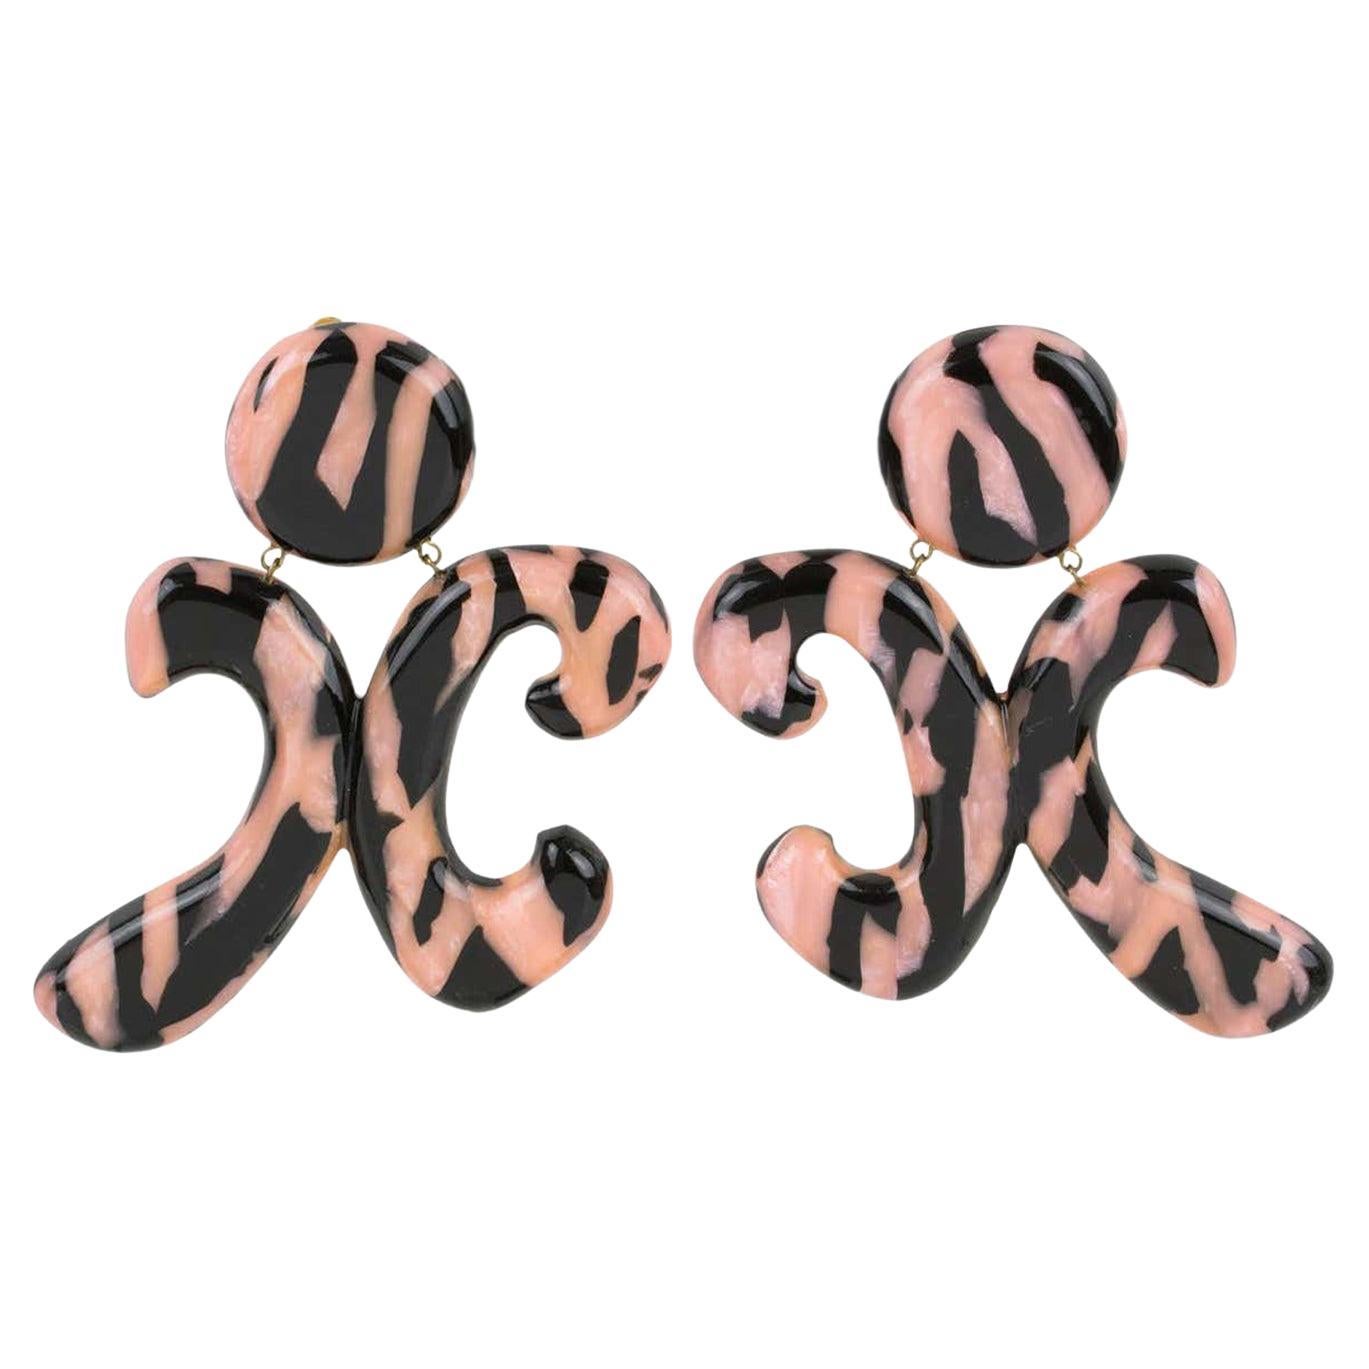 Christian Lacroix Massive Resin Clip Earrings Black and Pink Zebra Pattern For Sale